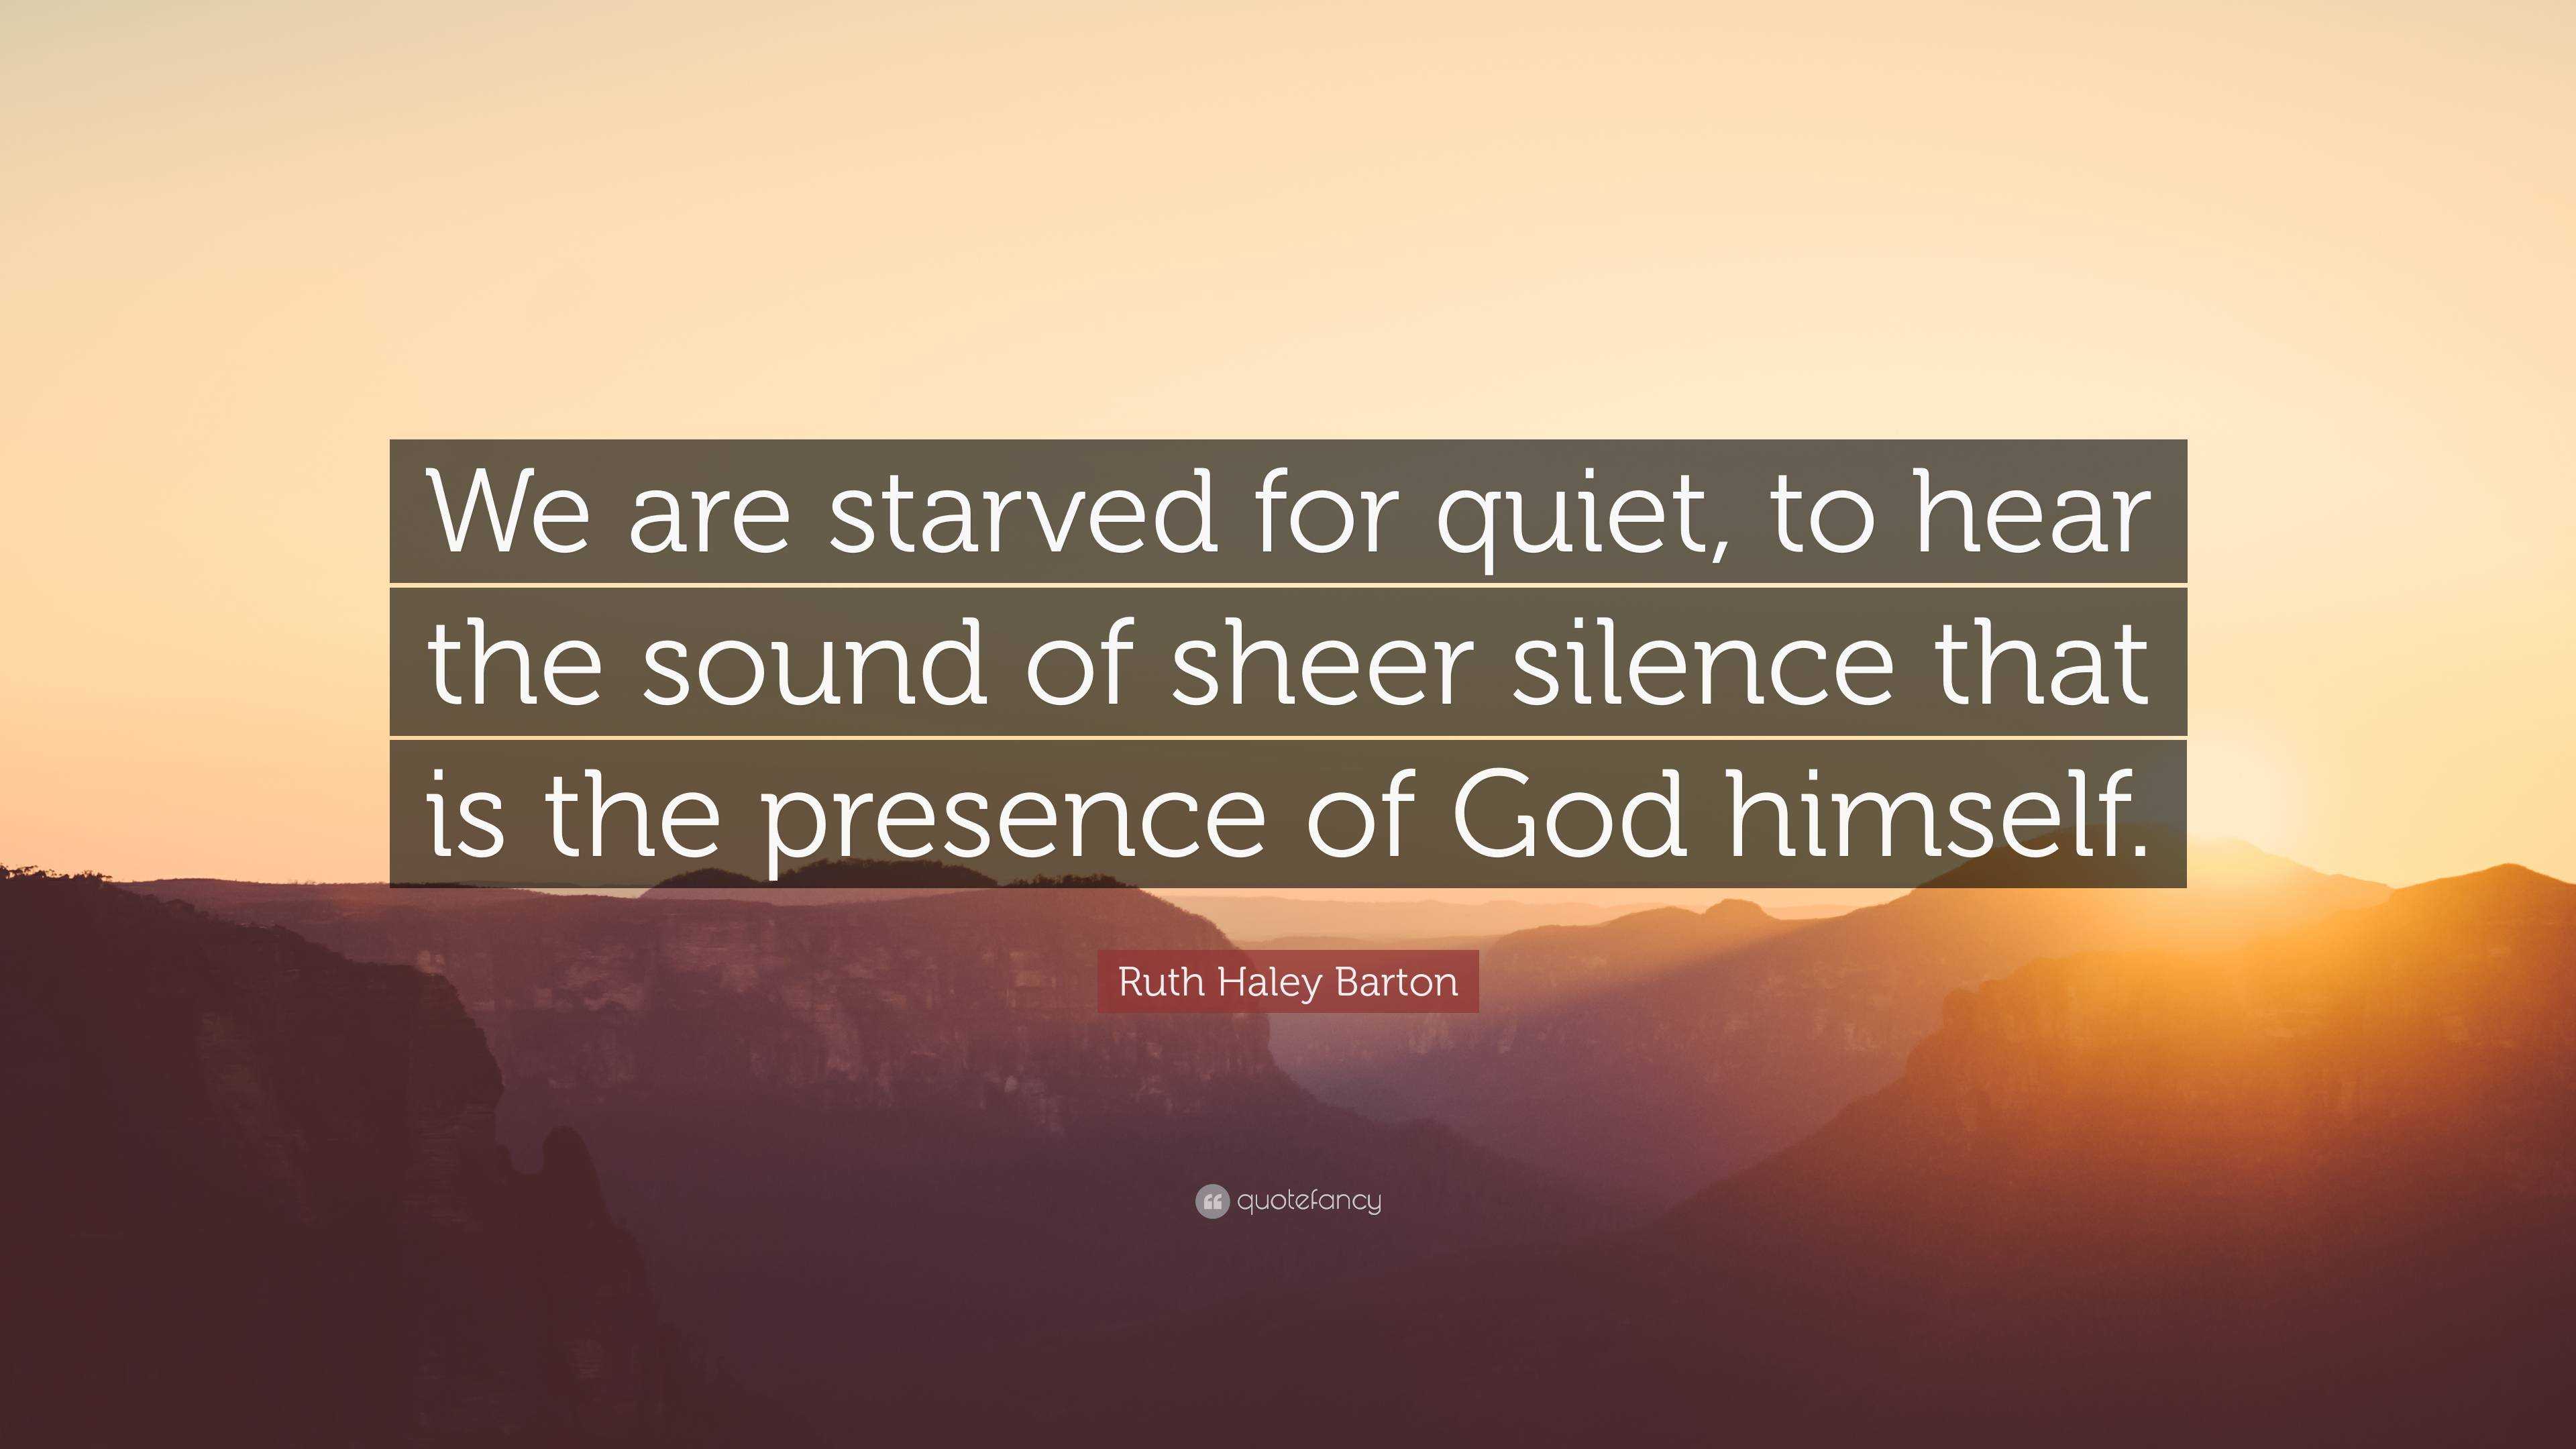 Ruth Haley Barton Quote: “We are starved for quiet, to hear the sound ...